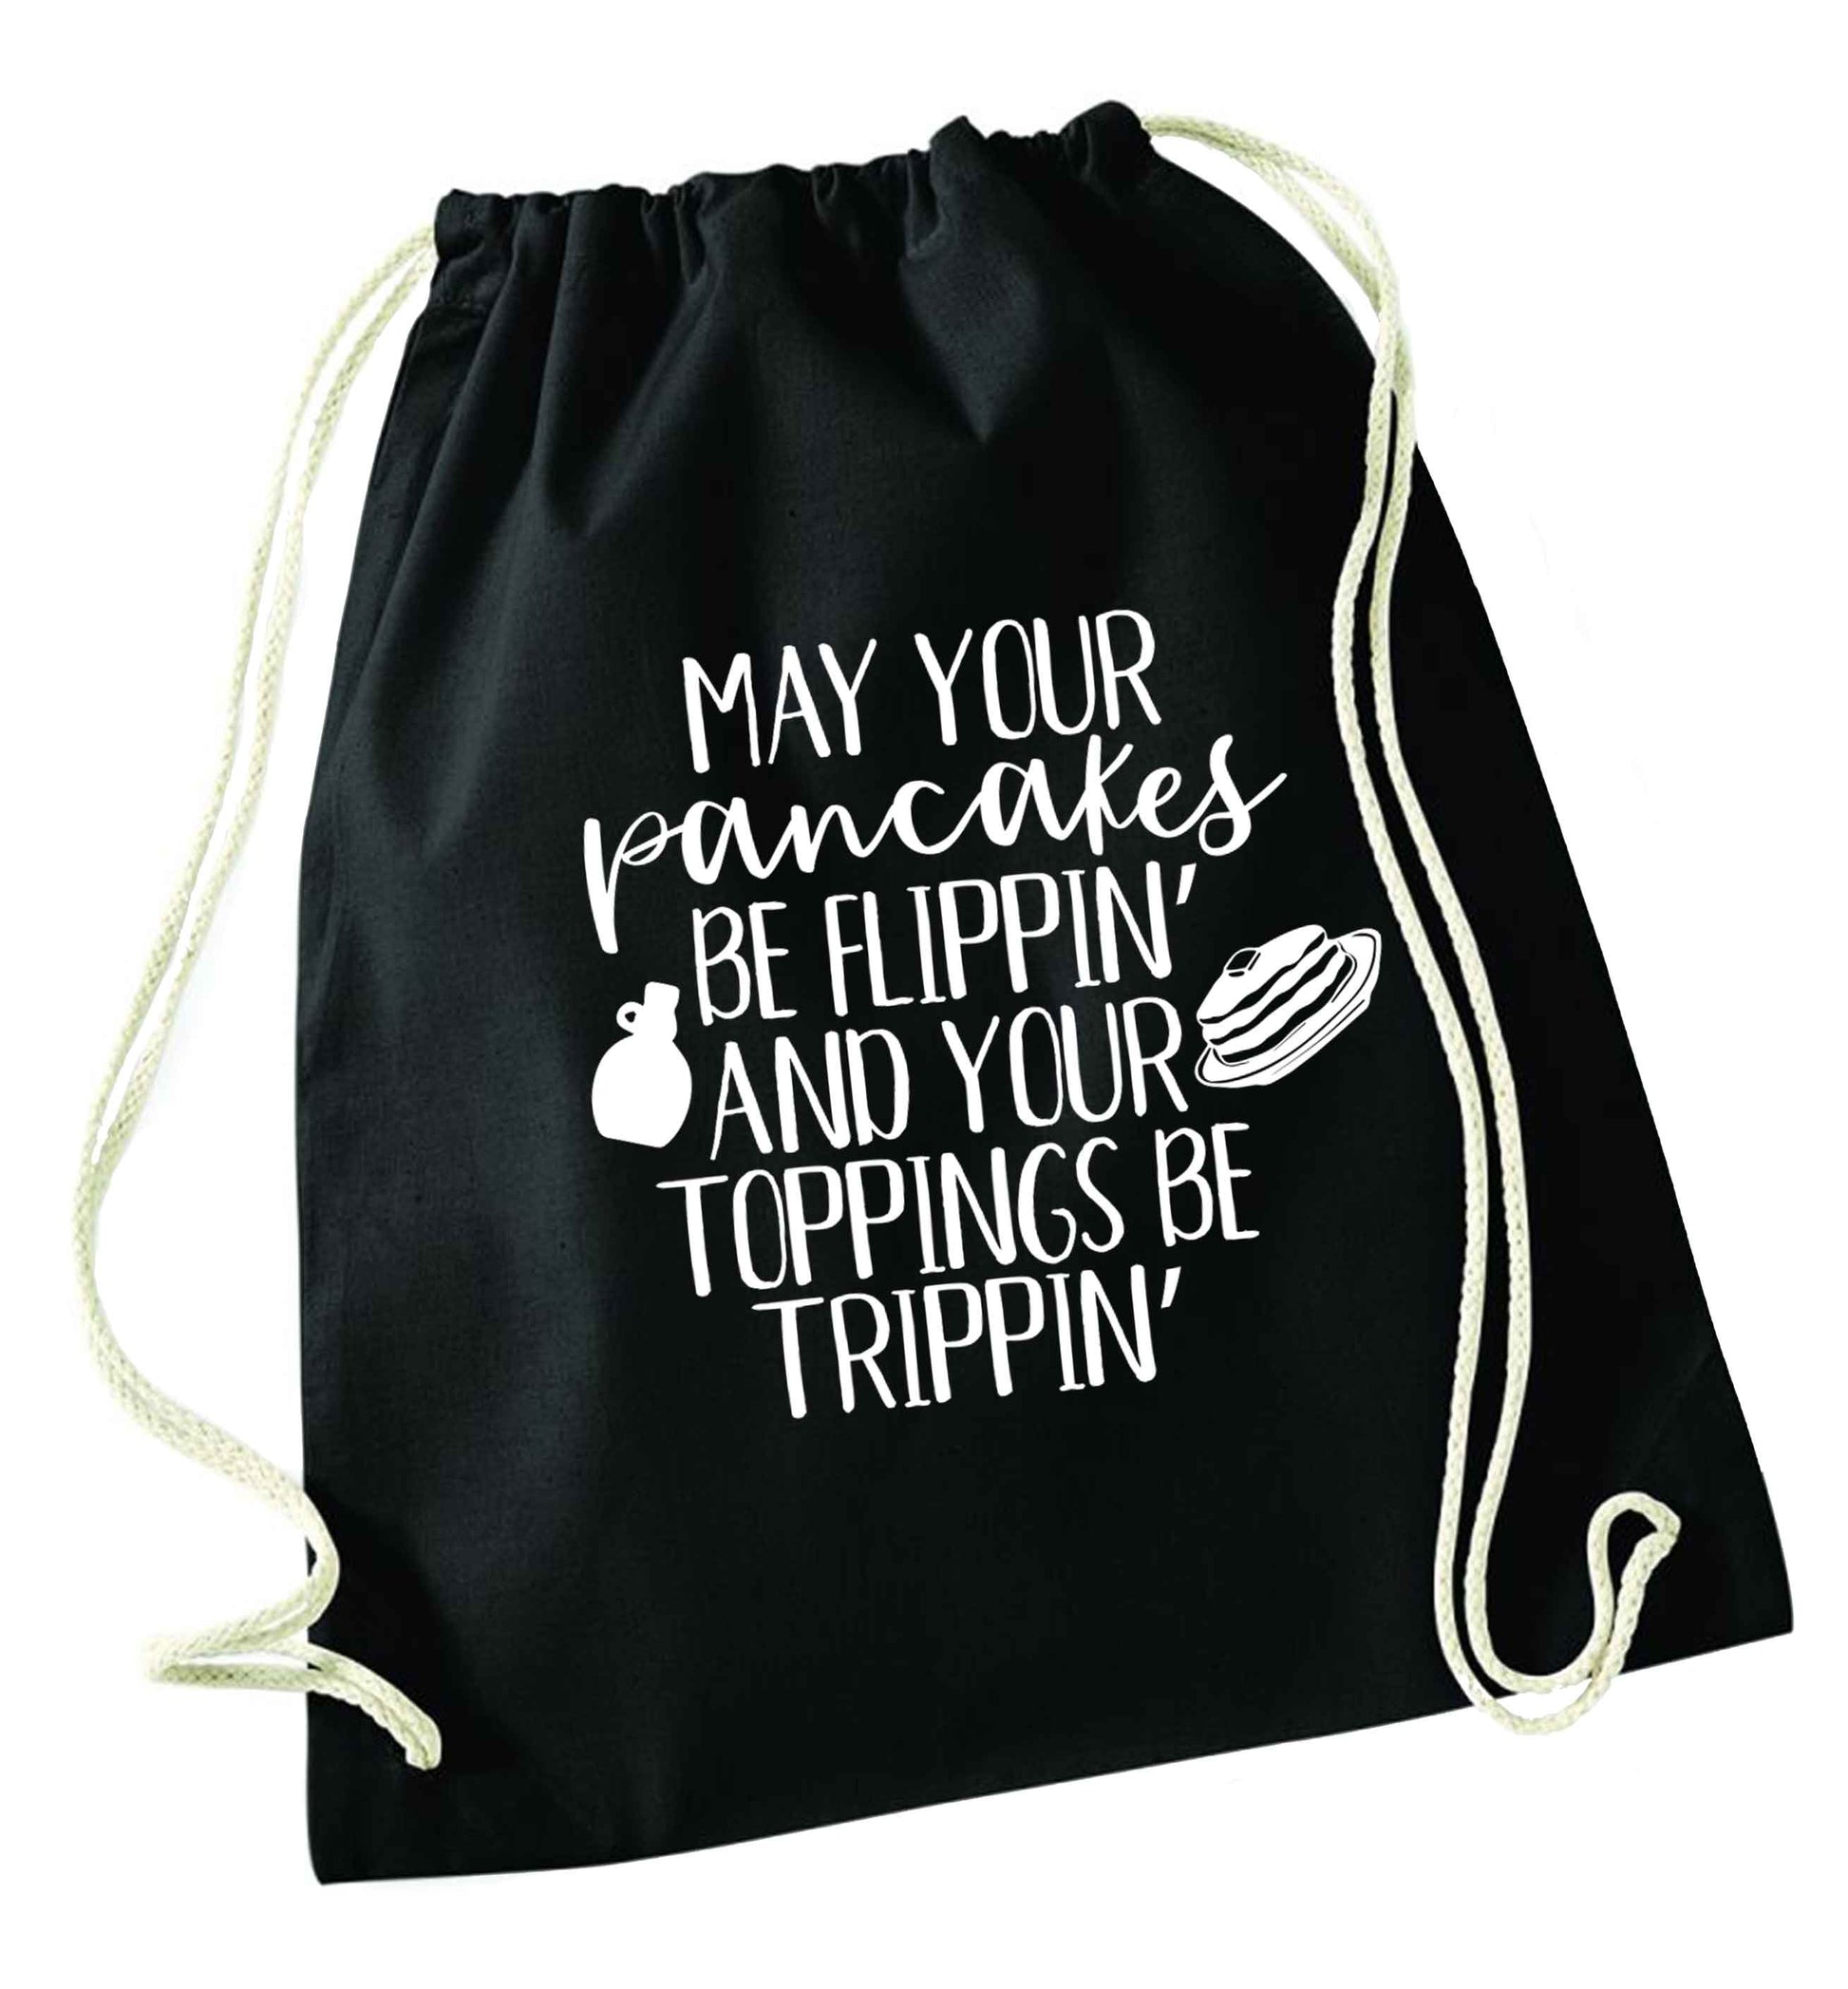 May your pancakes be flippin' and your toppings be trippin' black drawstring bag